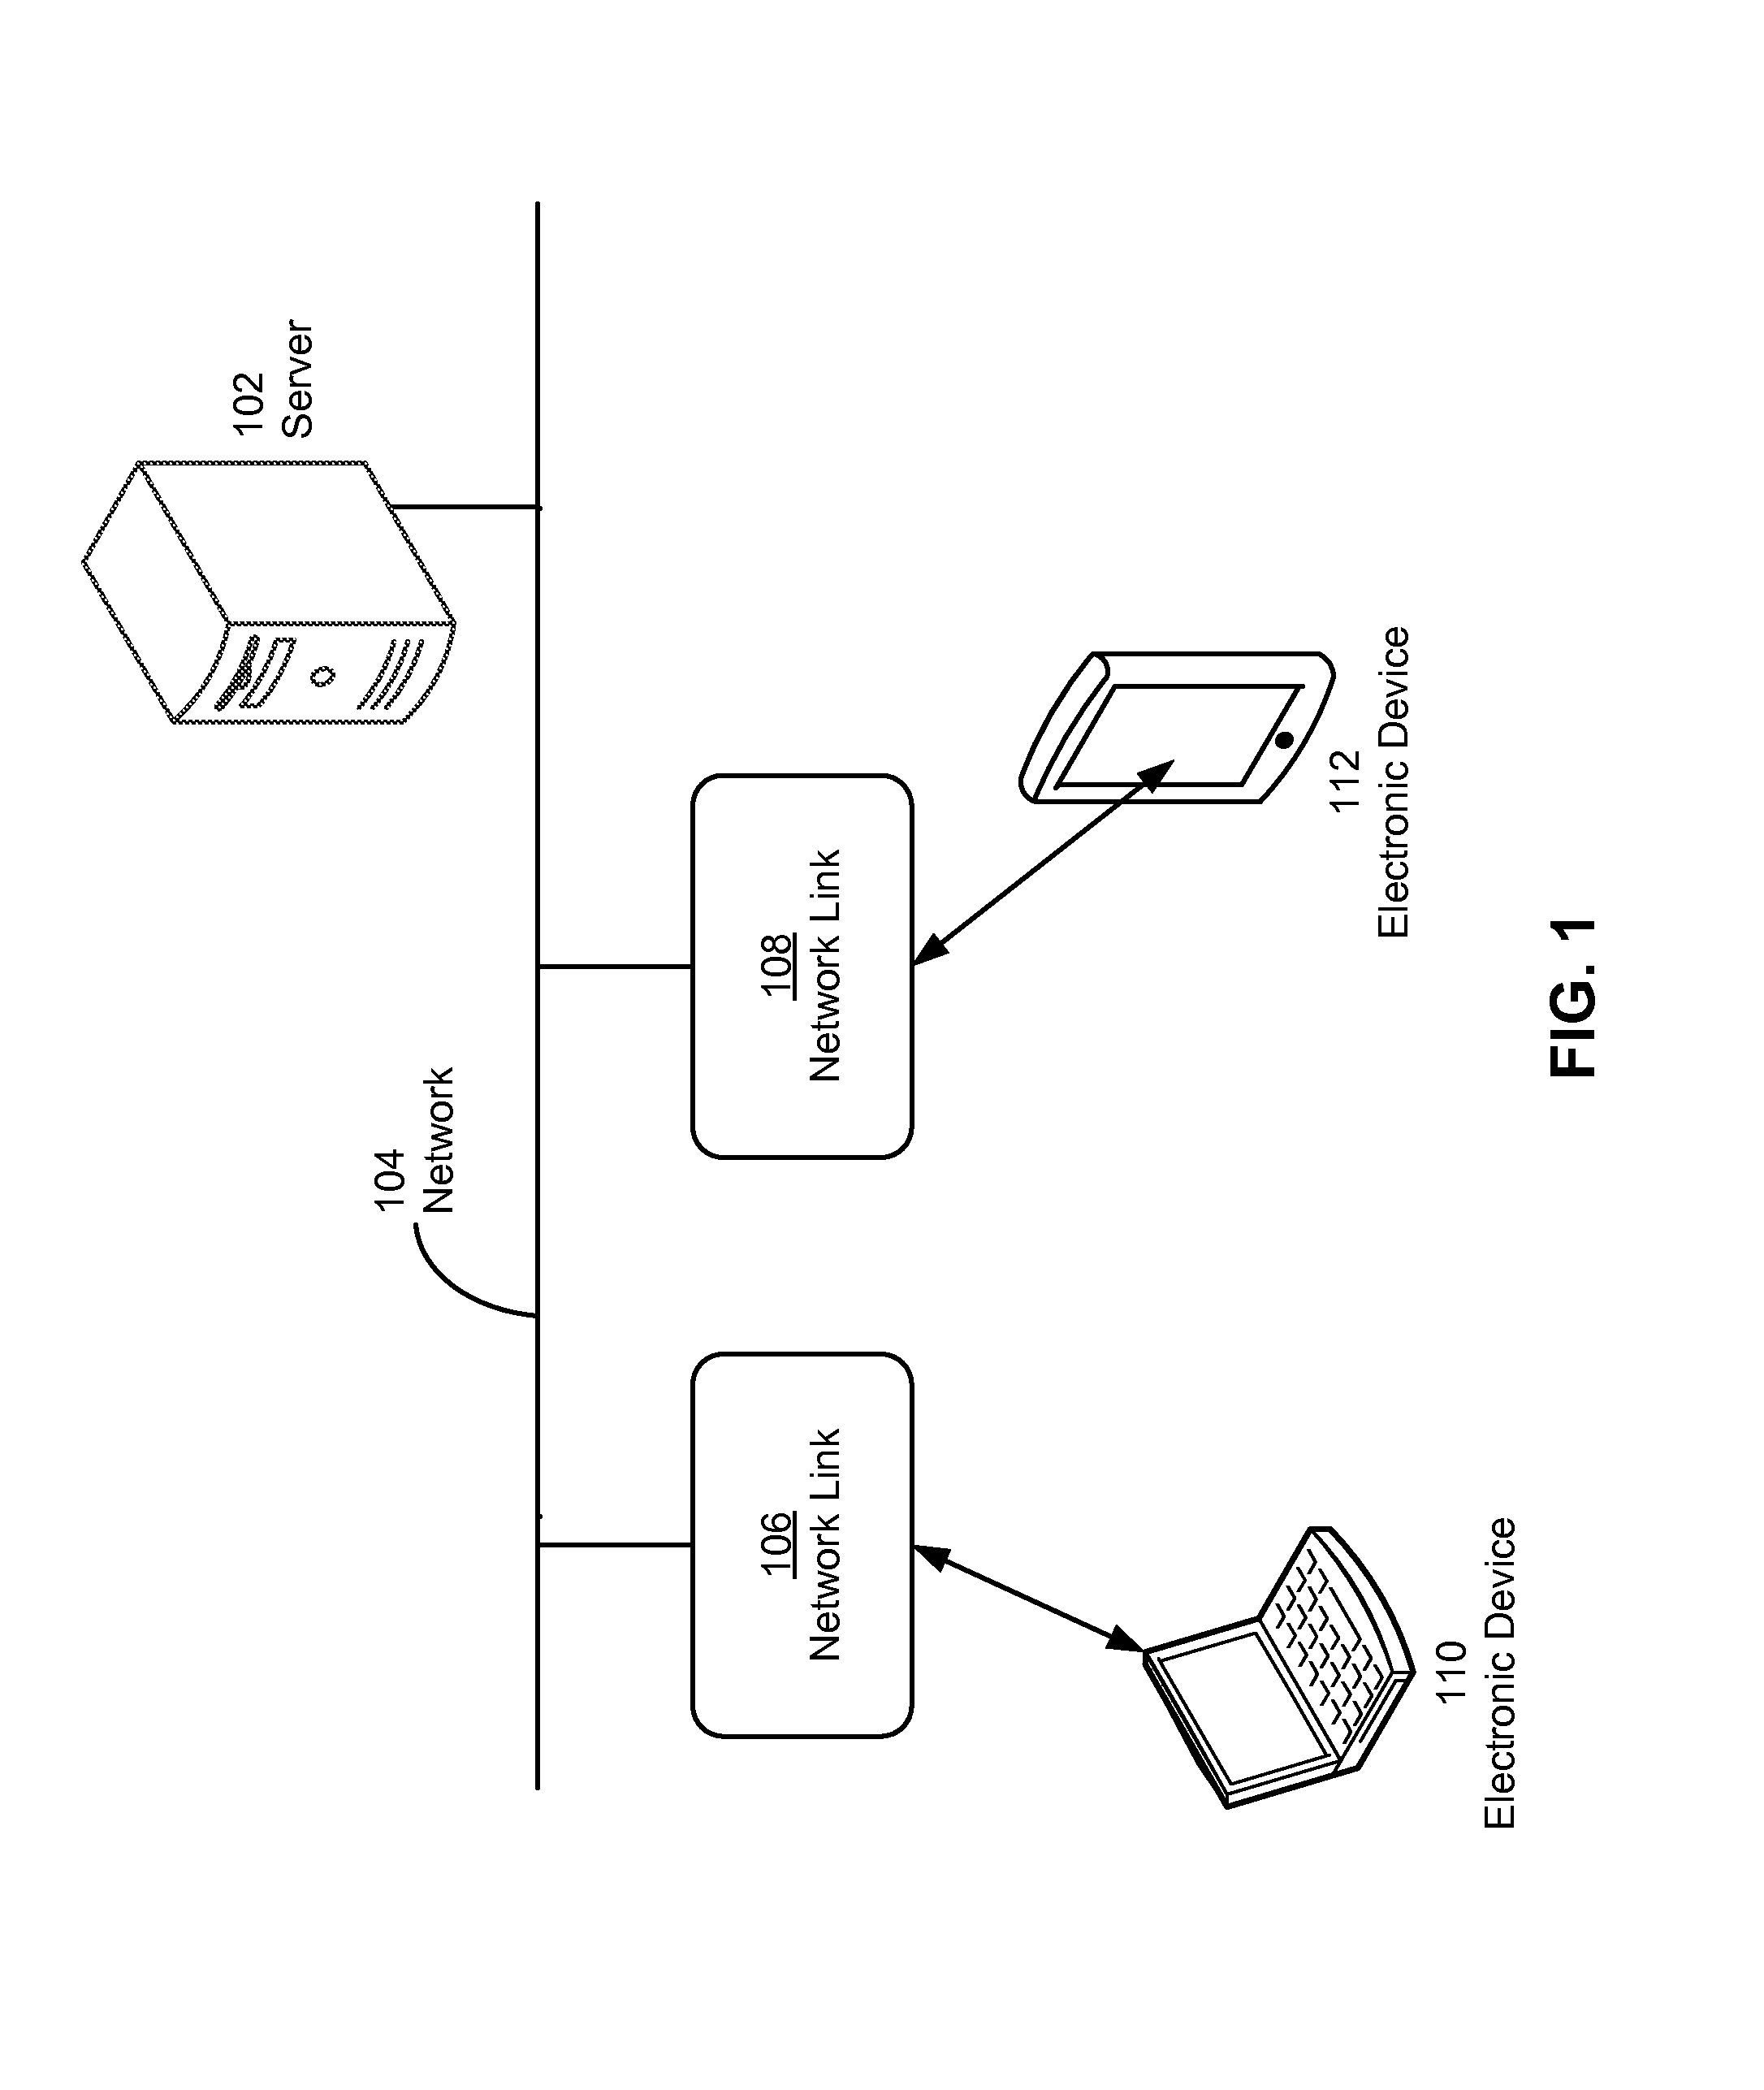 Adjusting radio dormancies in electronic devices based on receipt of unsolicited incoming packets